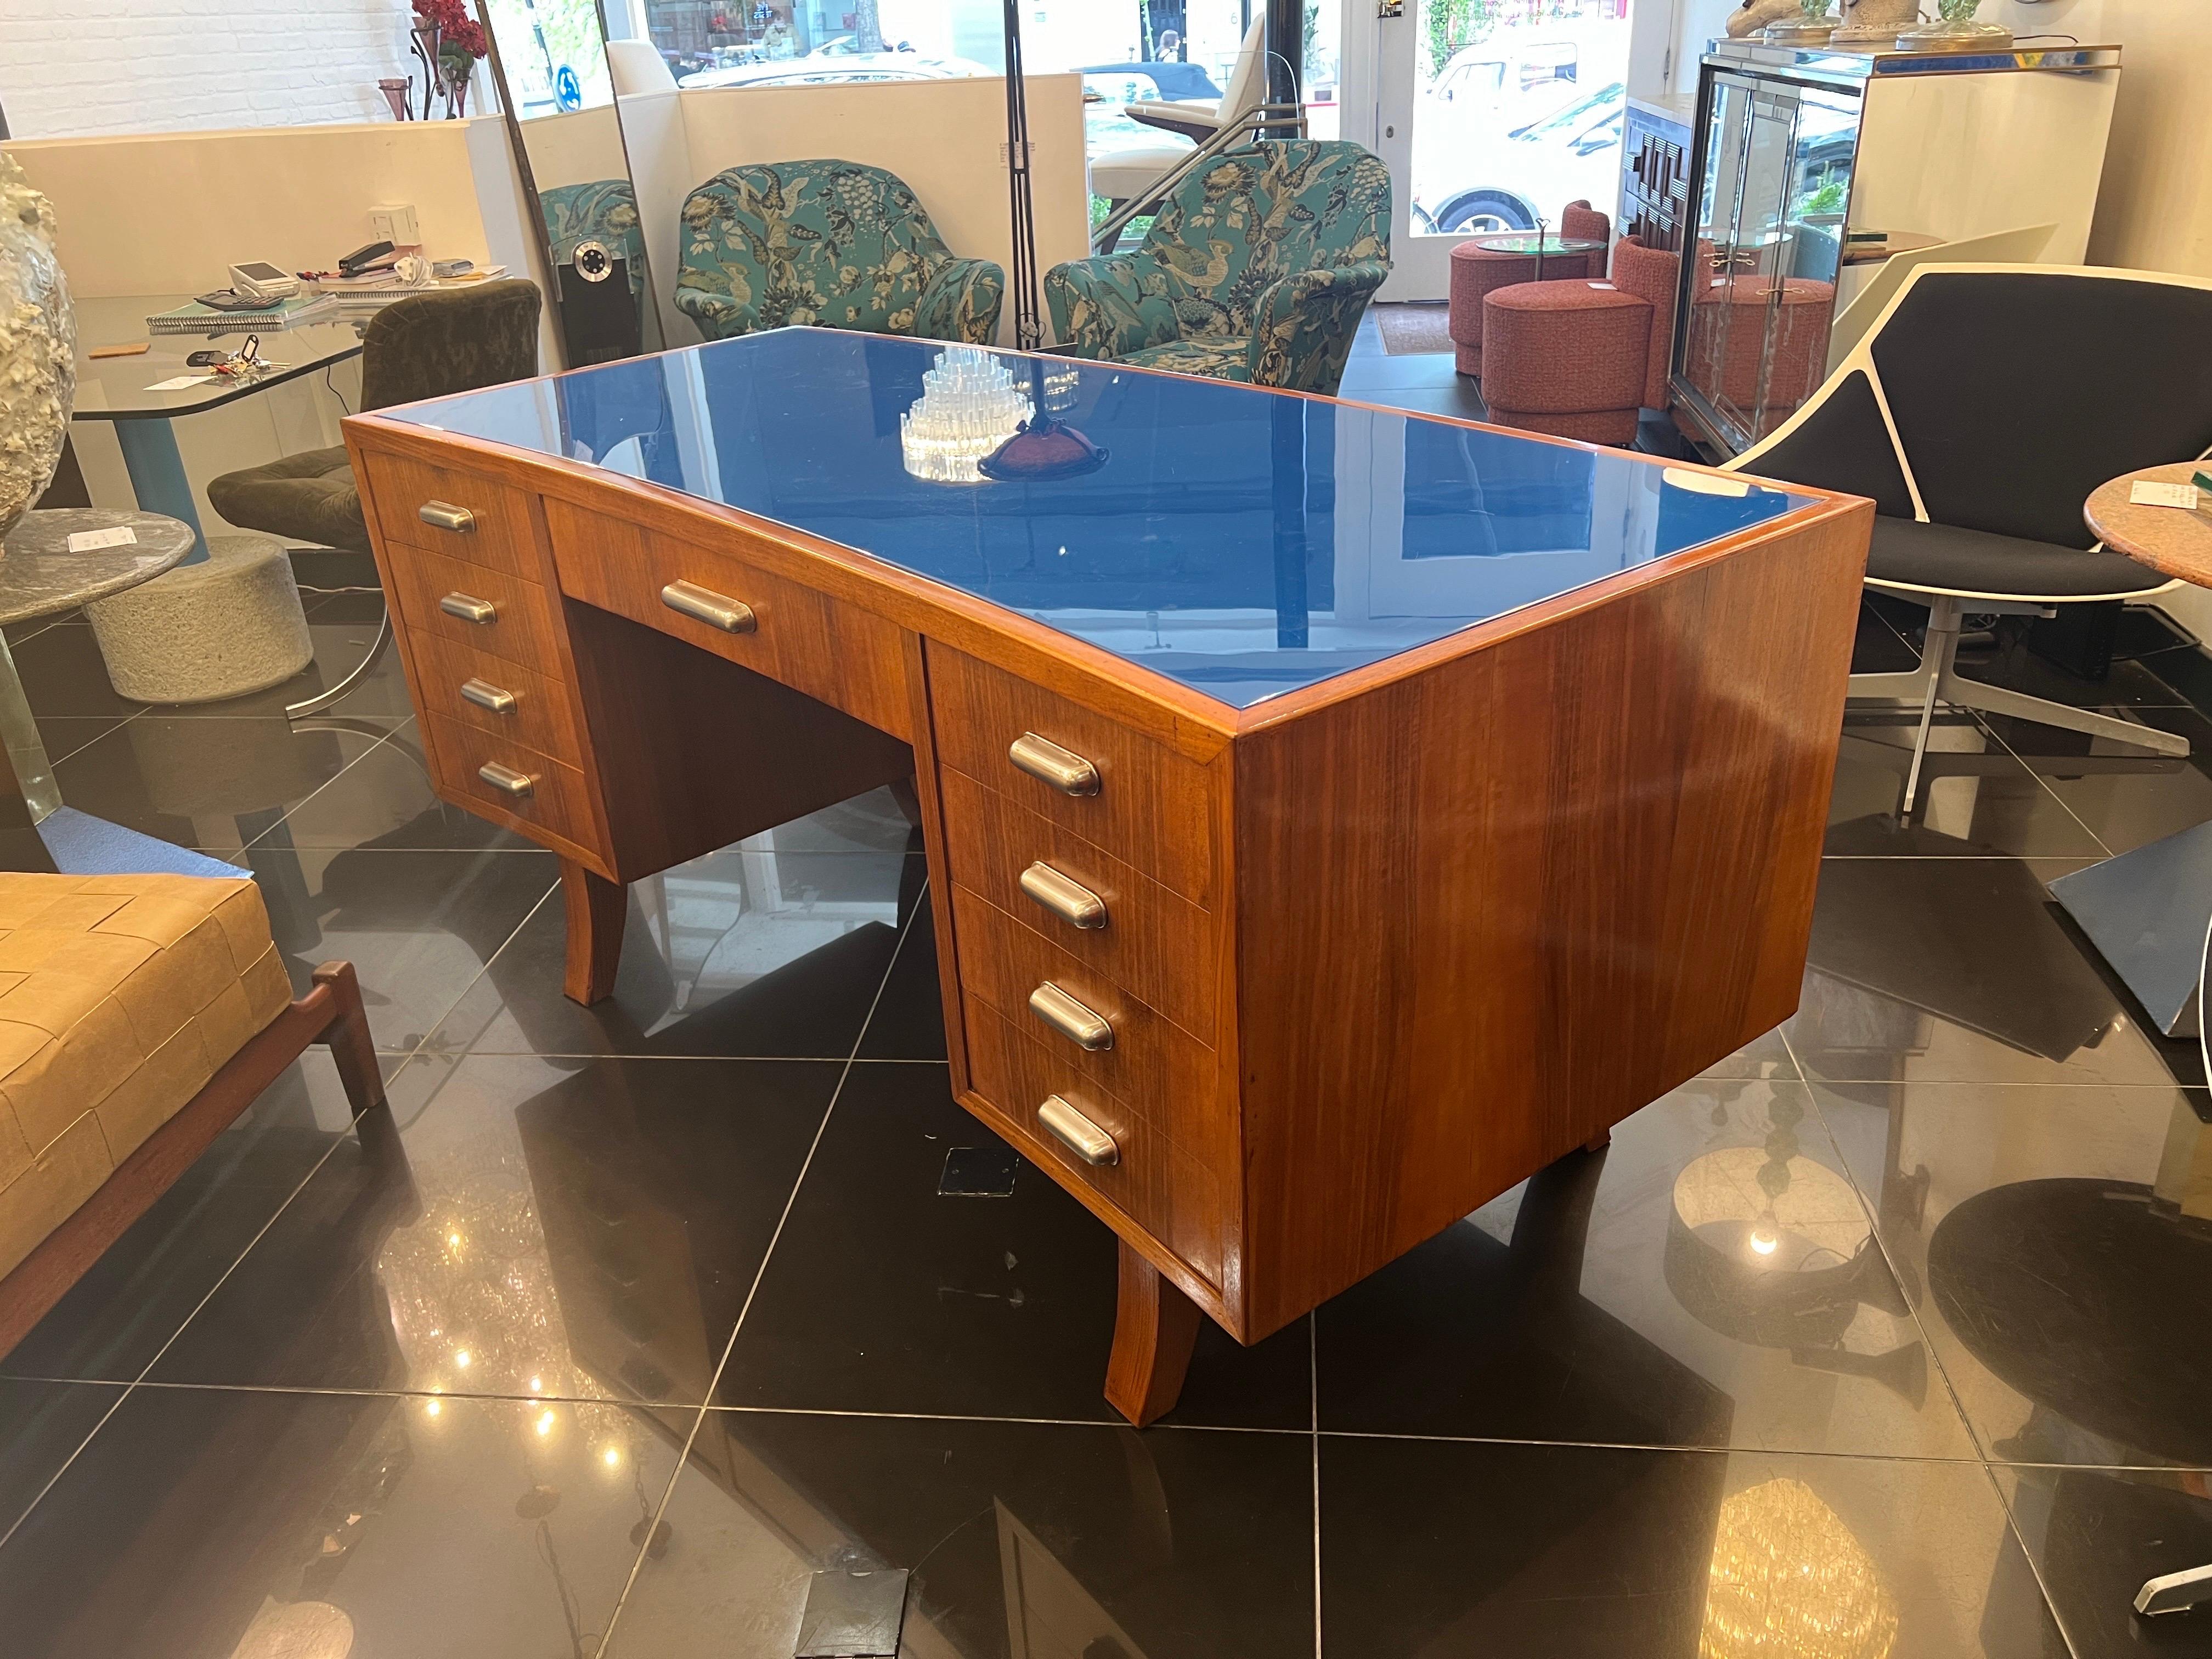 An extraordinary C1940 Italian curved desk made from solid cherrywood with a cobalt blue glass top . there’s a total of 9 drawers with their original aluminium handles to the front and a fabulous reeded curved cherrywood to the rear. 
This is a